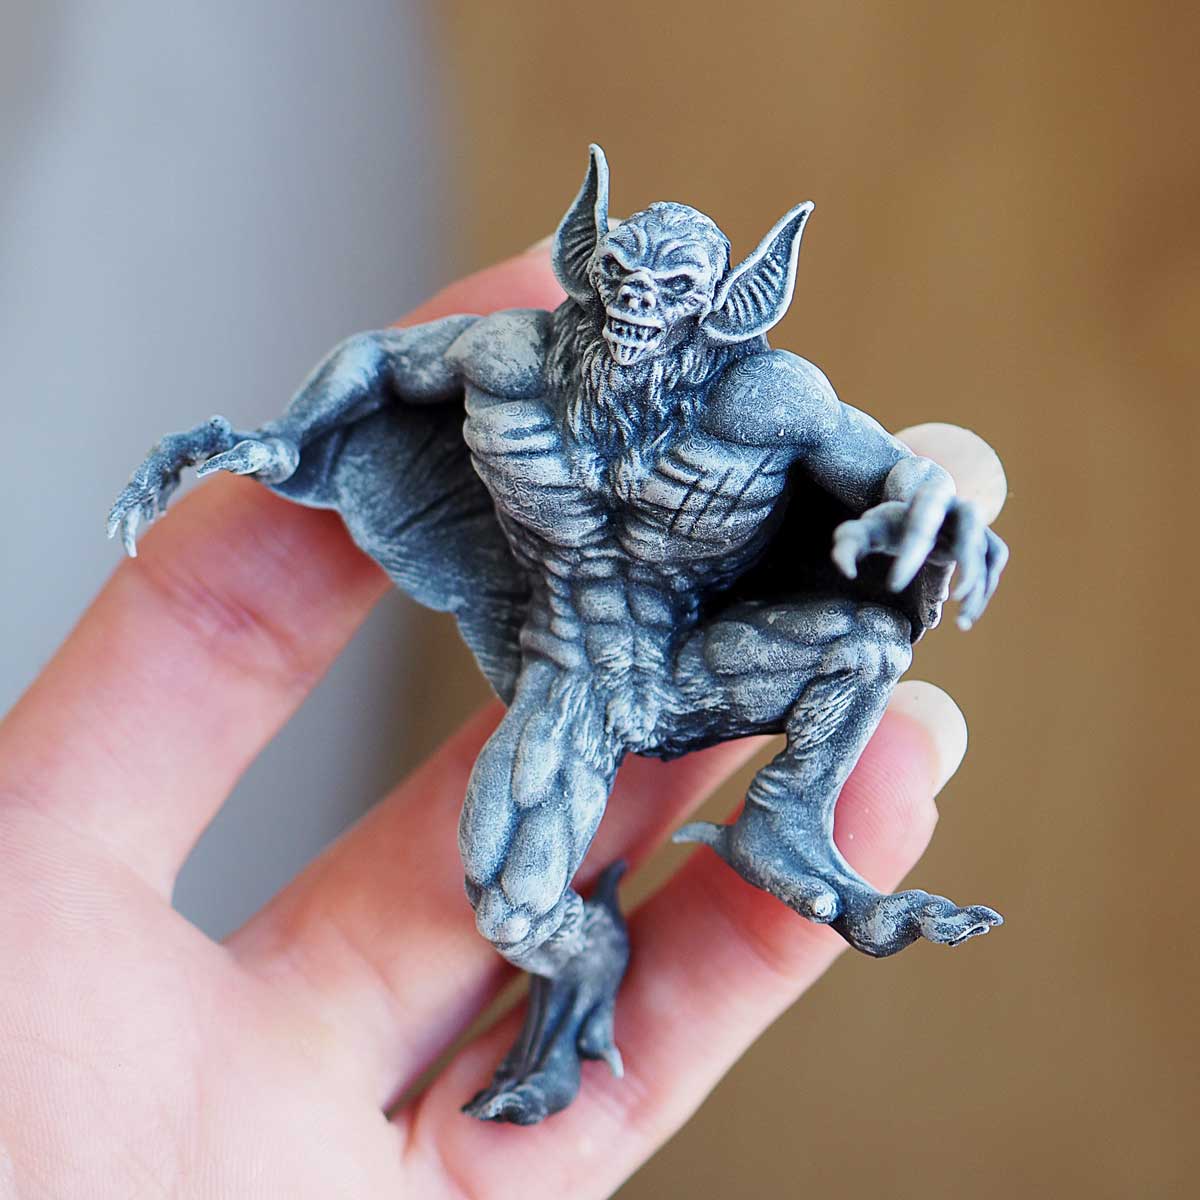 My vampire🧛‍♂️ is definitely not as sexy as a certain Edward Cullen (well, to tell you the truth, I'm more of a werewolf team). Ready to run or fight? Team vampire or team werewolf?🐺🧛‍♂️
-----
#3dprinting #tabletopgames #dungeonsanddragons #tabletoprpg  #miniaturepainting #3dprint